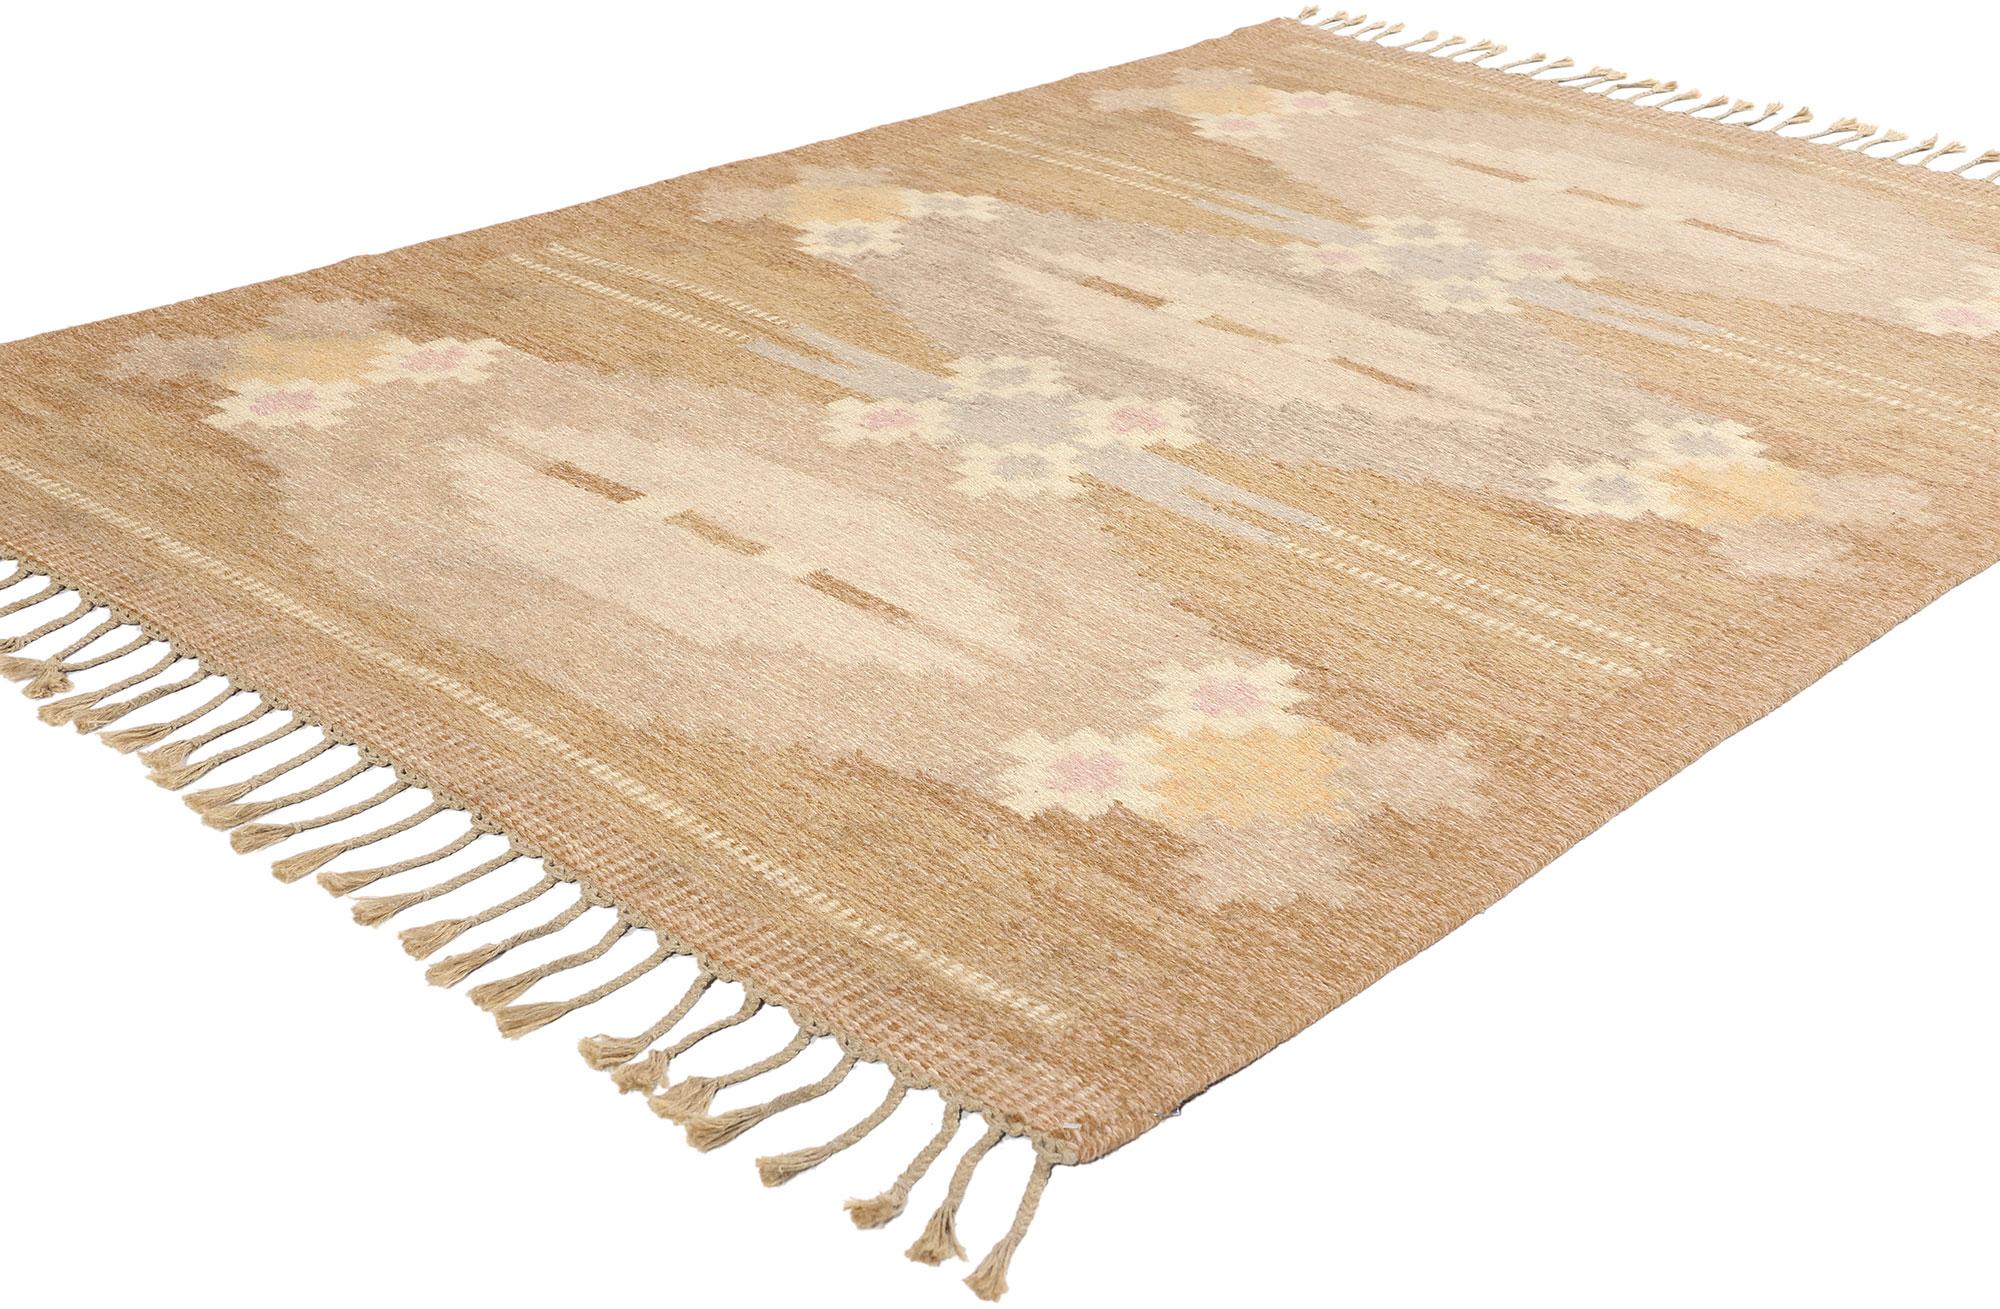 78256 Vintage Swedish Rug Rollakan by Ingegerd Silow, 04'06 x 06'07. With its Scandinavian Modern style, incredible detail and texture, this handwoven wool vintage Swedish rollakan rug is a captivating vision of woven beauty. The geometric design